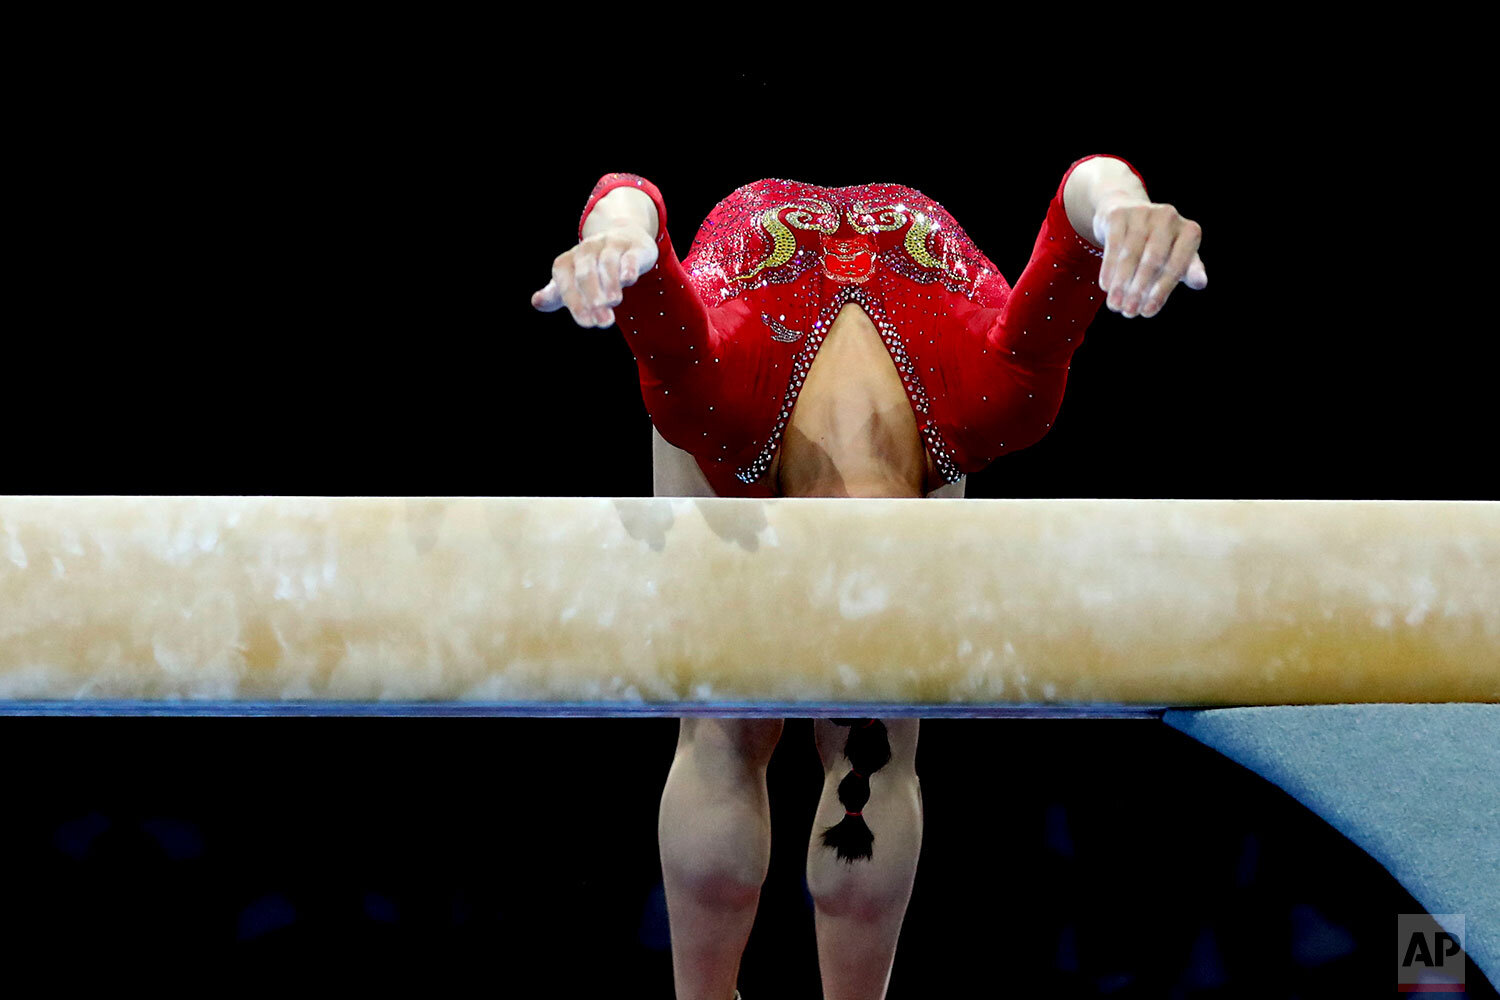  Tingting Liu of China performs on the balance beam during women's team final at the Gymnastics World Championships in Stuttgart, Germany, Tuesday, Oct. 8, 2019. (AP Photo/Matthias Schrader) 